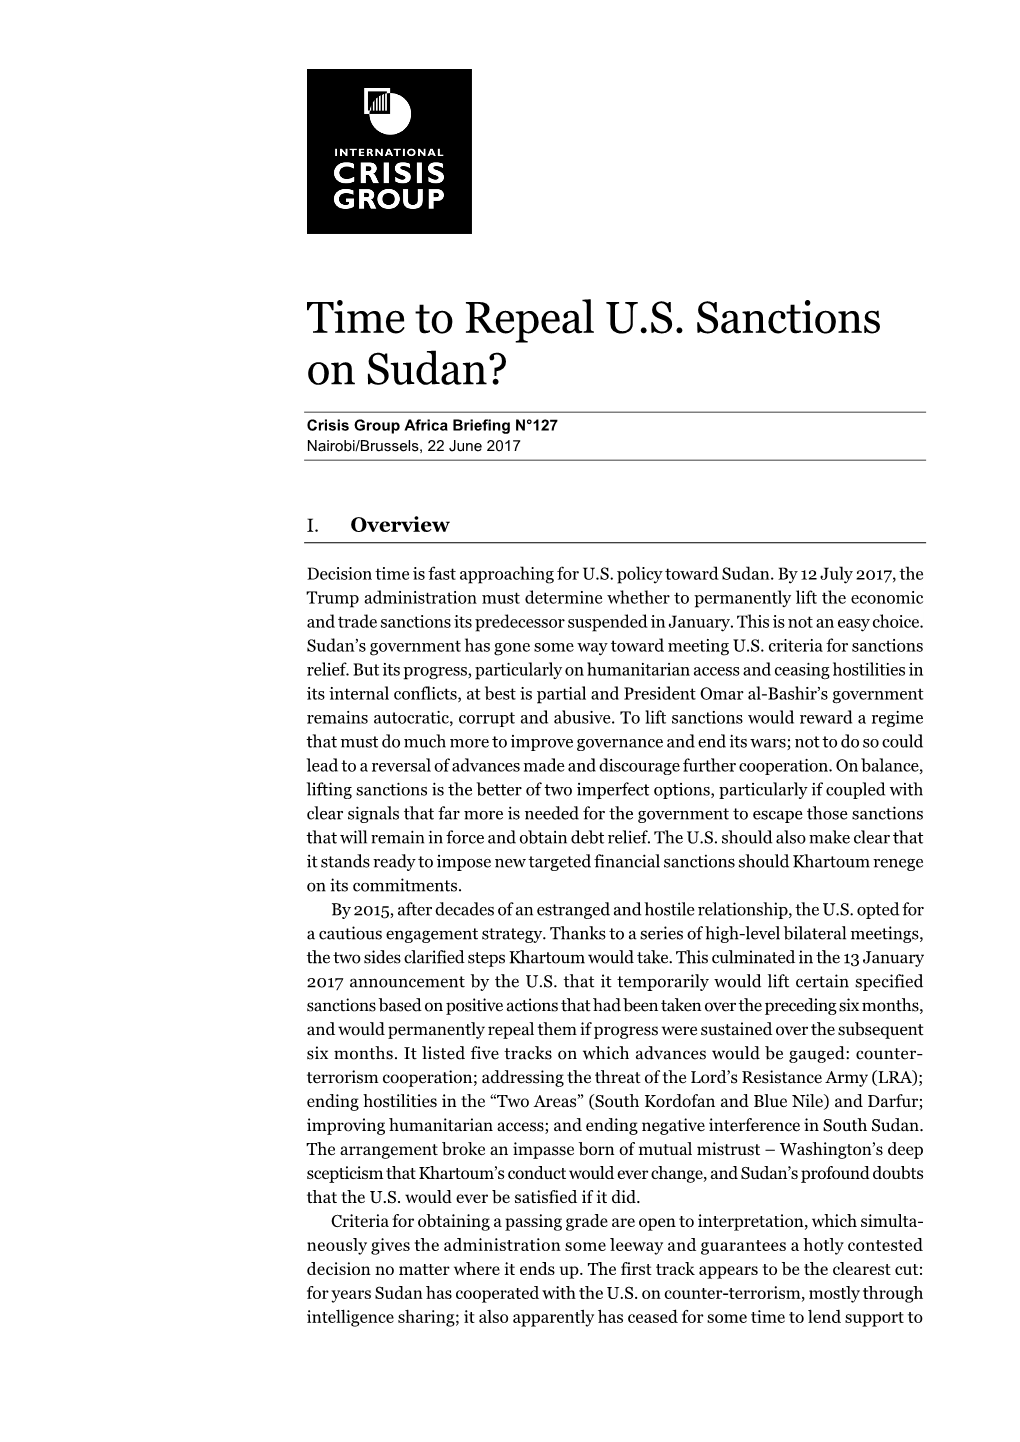 Time to Repeal U.S. Sanctions on Sudan?